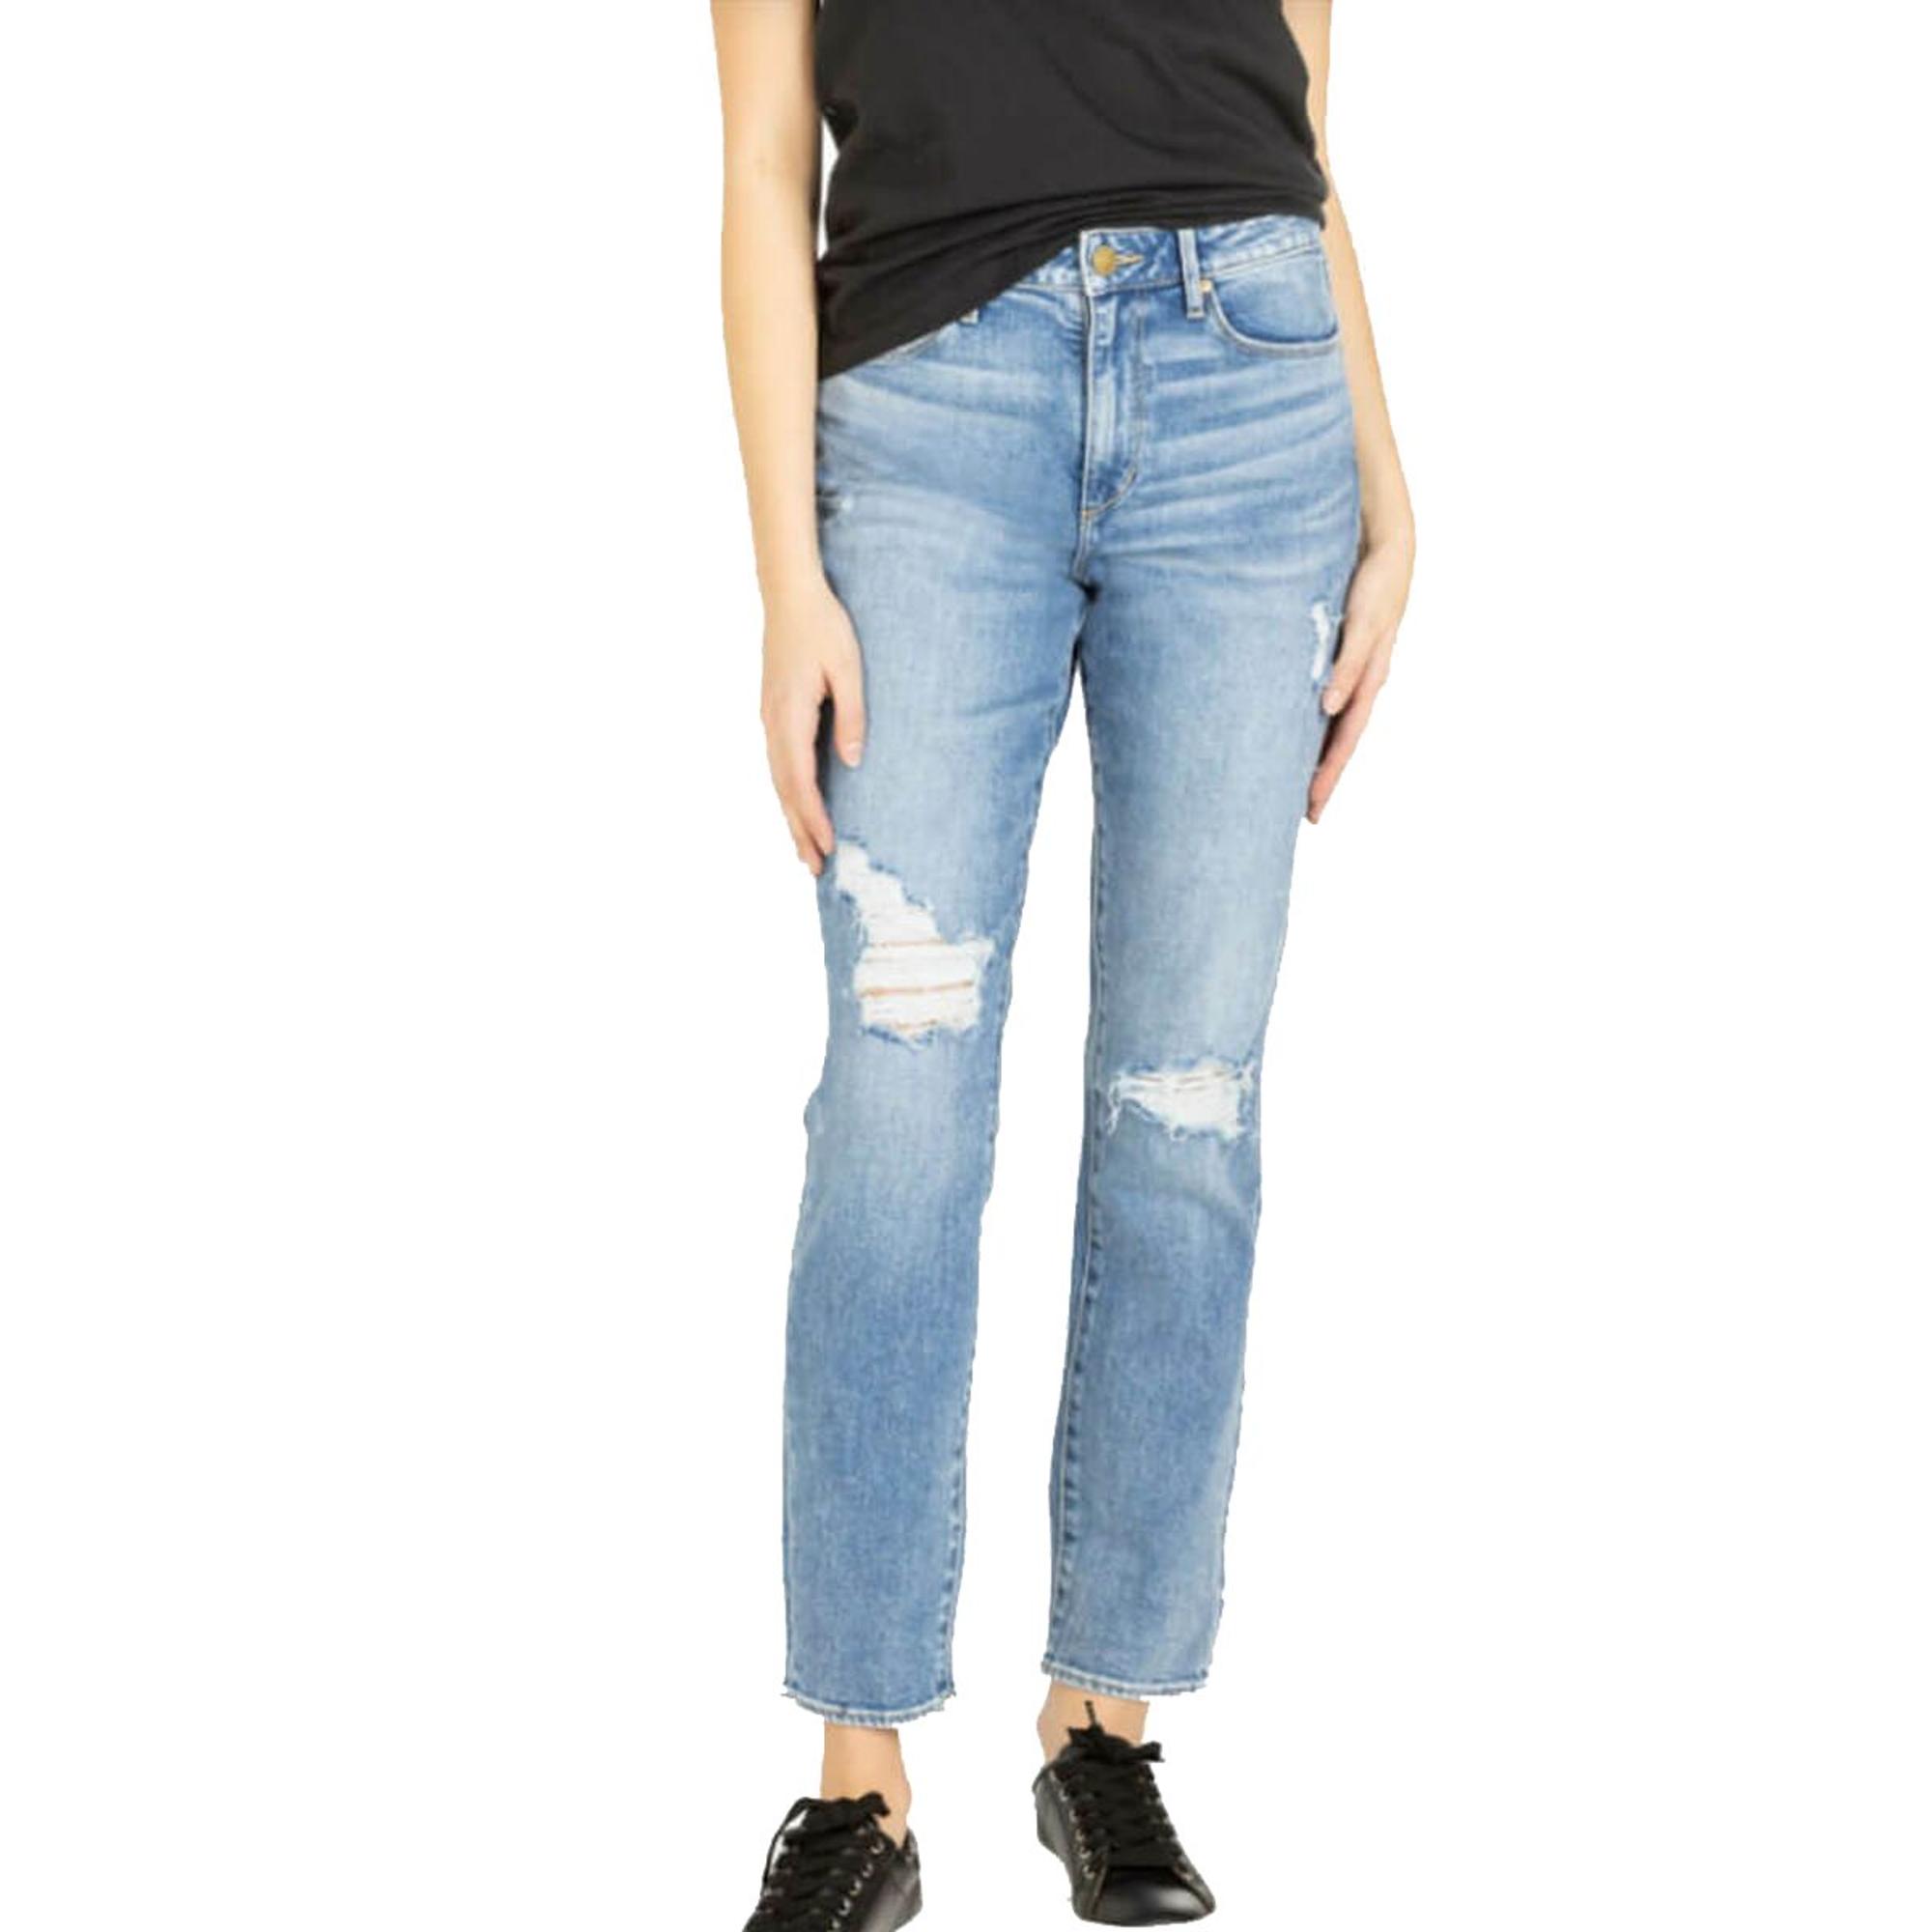 Rene Haralson Distressed Skinny Jeans